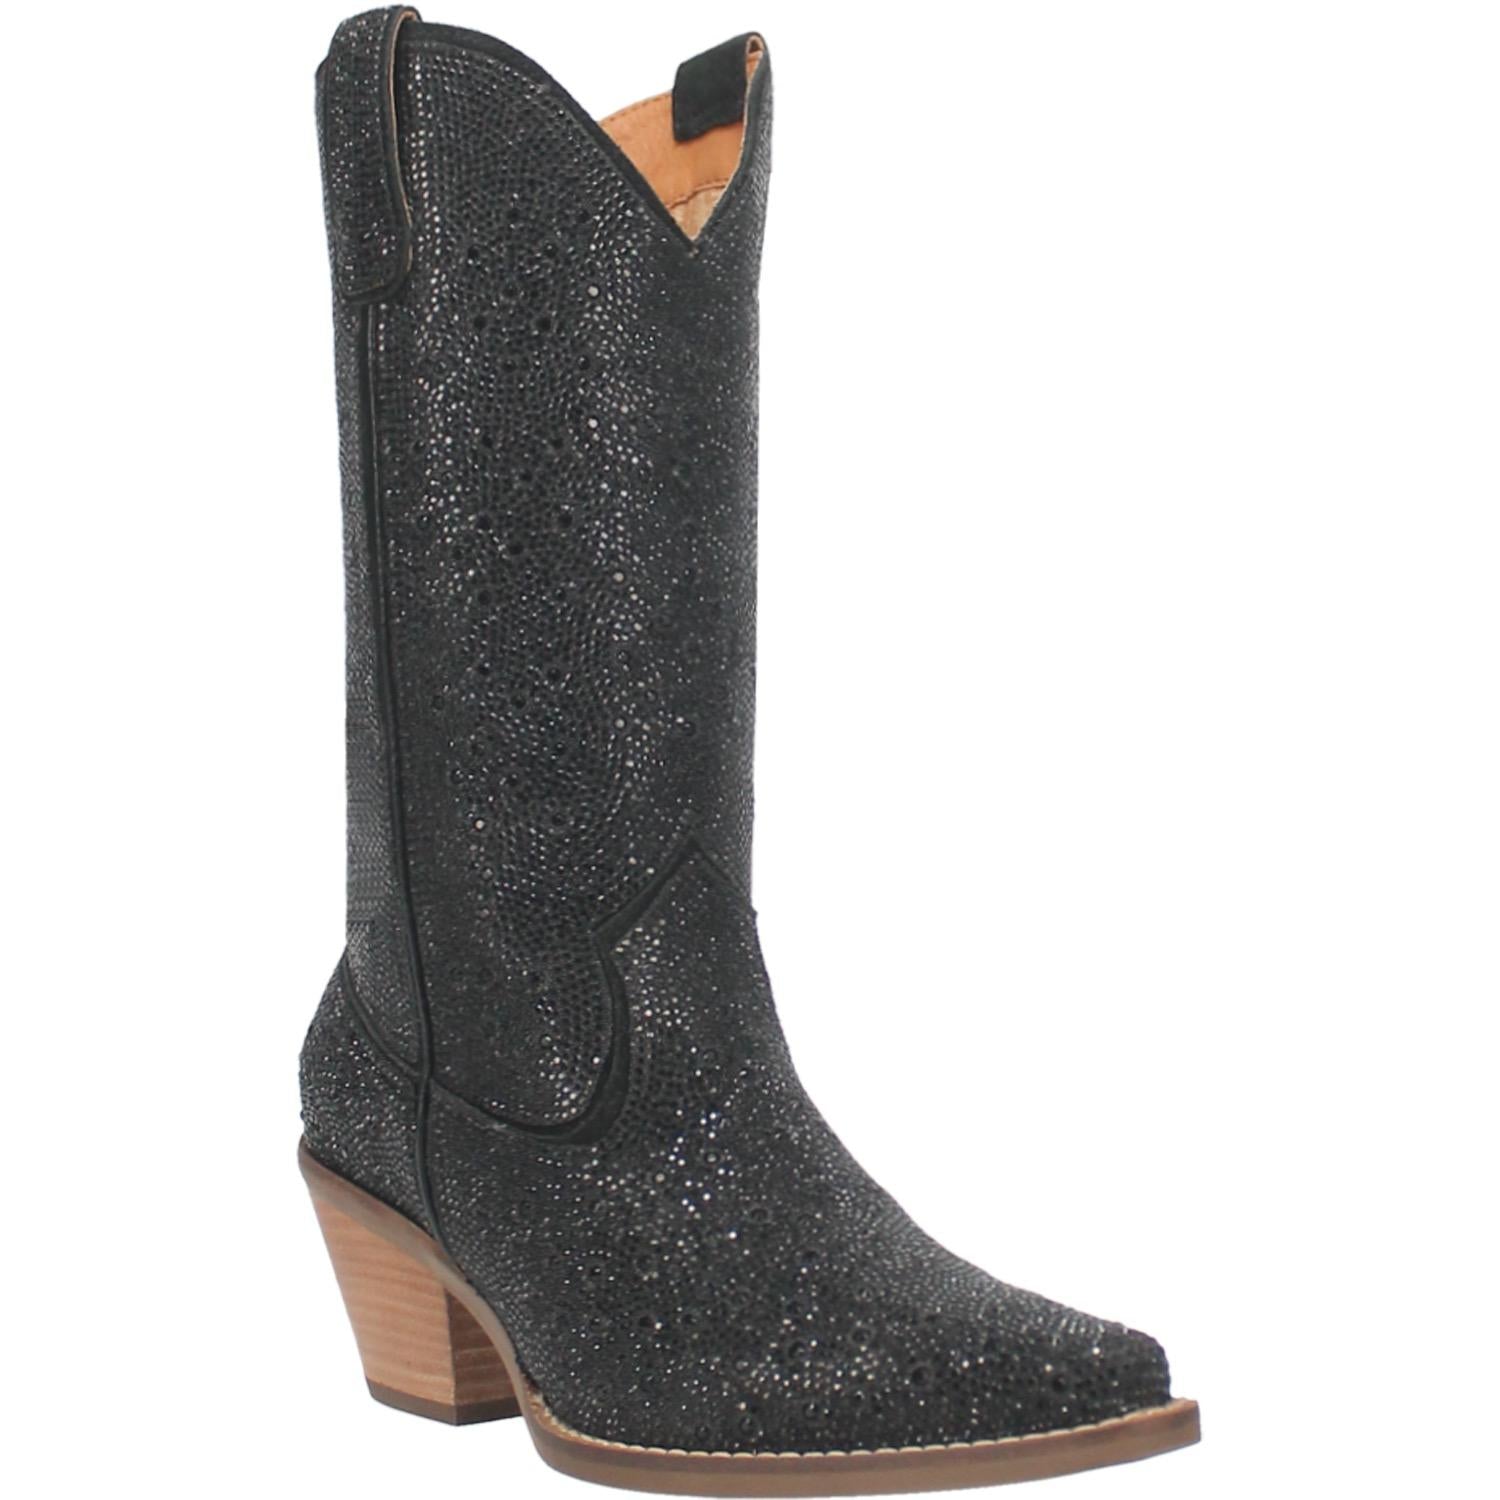 A mid calf length black boot with rhinestones from top to bottom, matching leather straps, a short heel, and a V cut at the top. Item is pictured on a white background